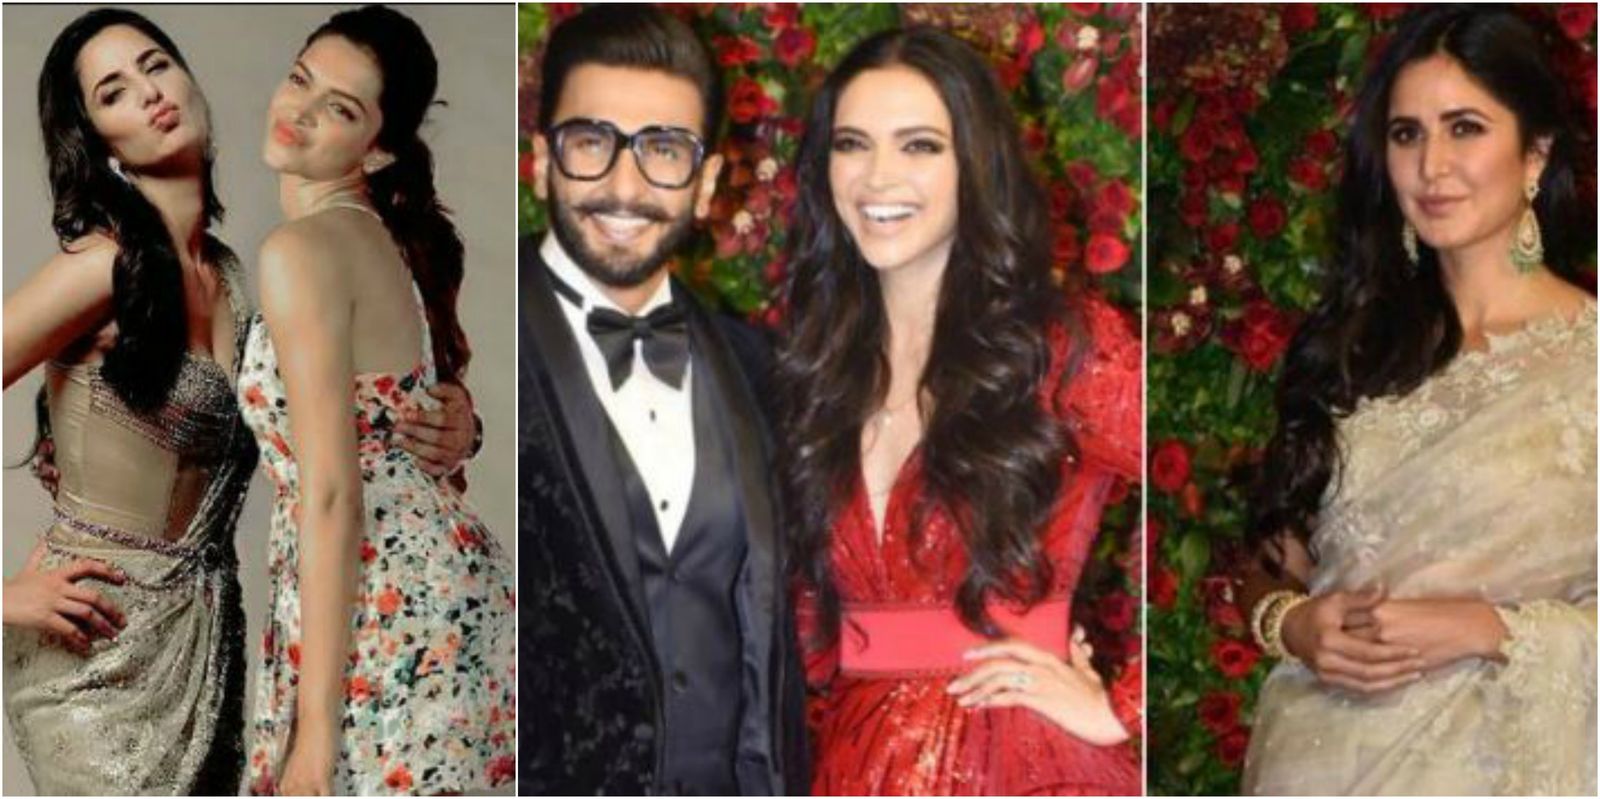 These 5 Instances Prove That Deepika And Katrina Have Really Become Friends And Let Bygones Be Bygones